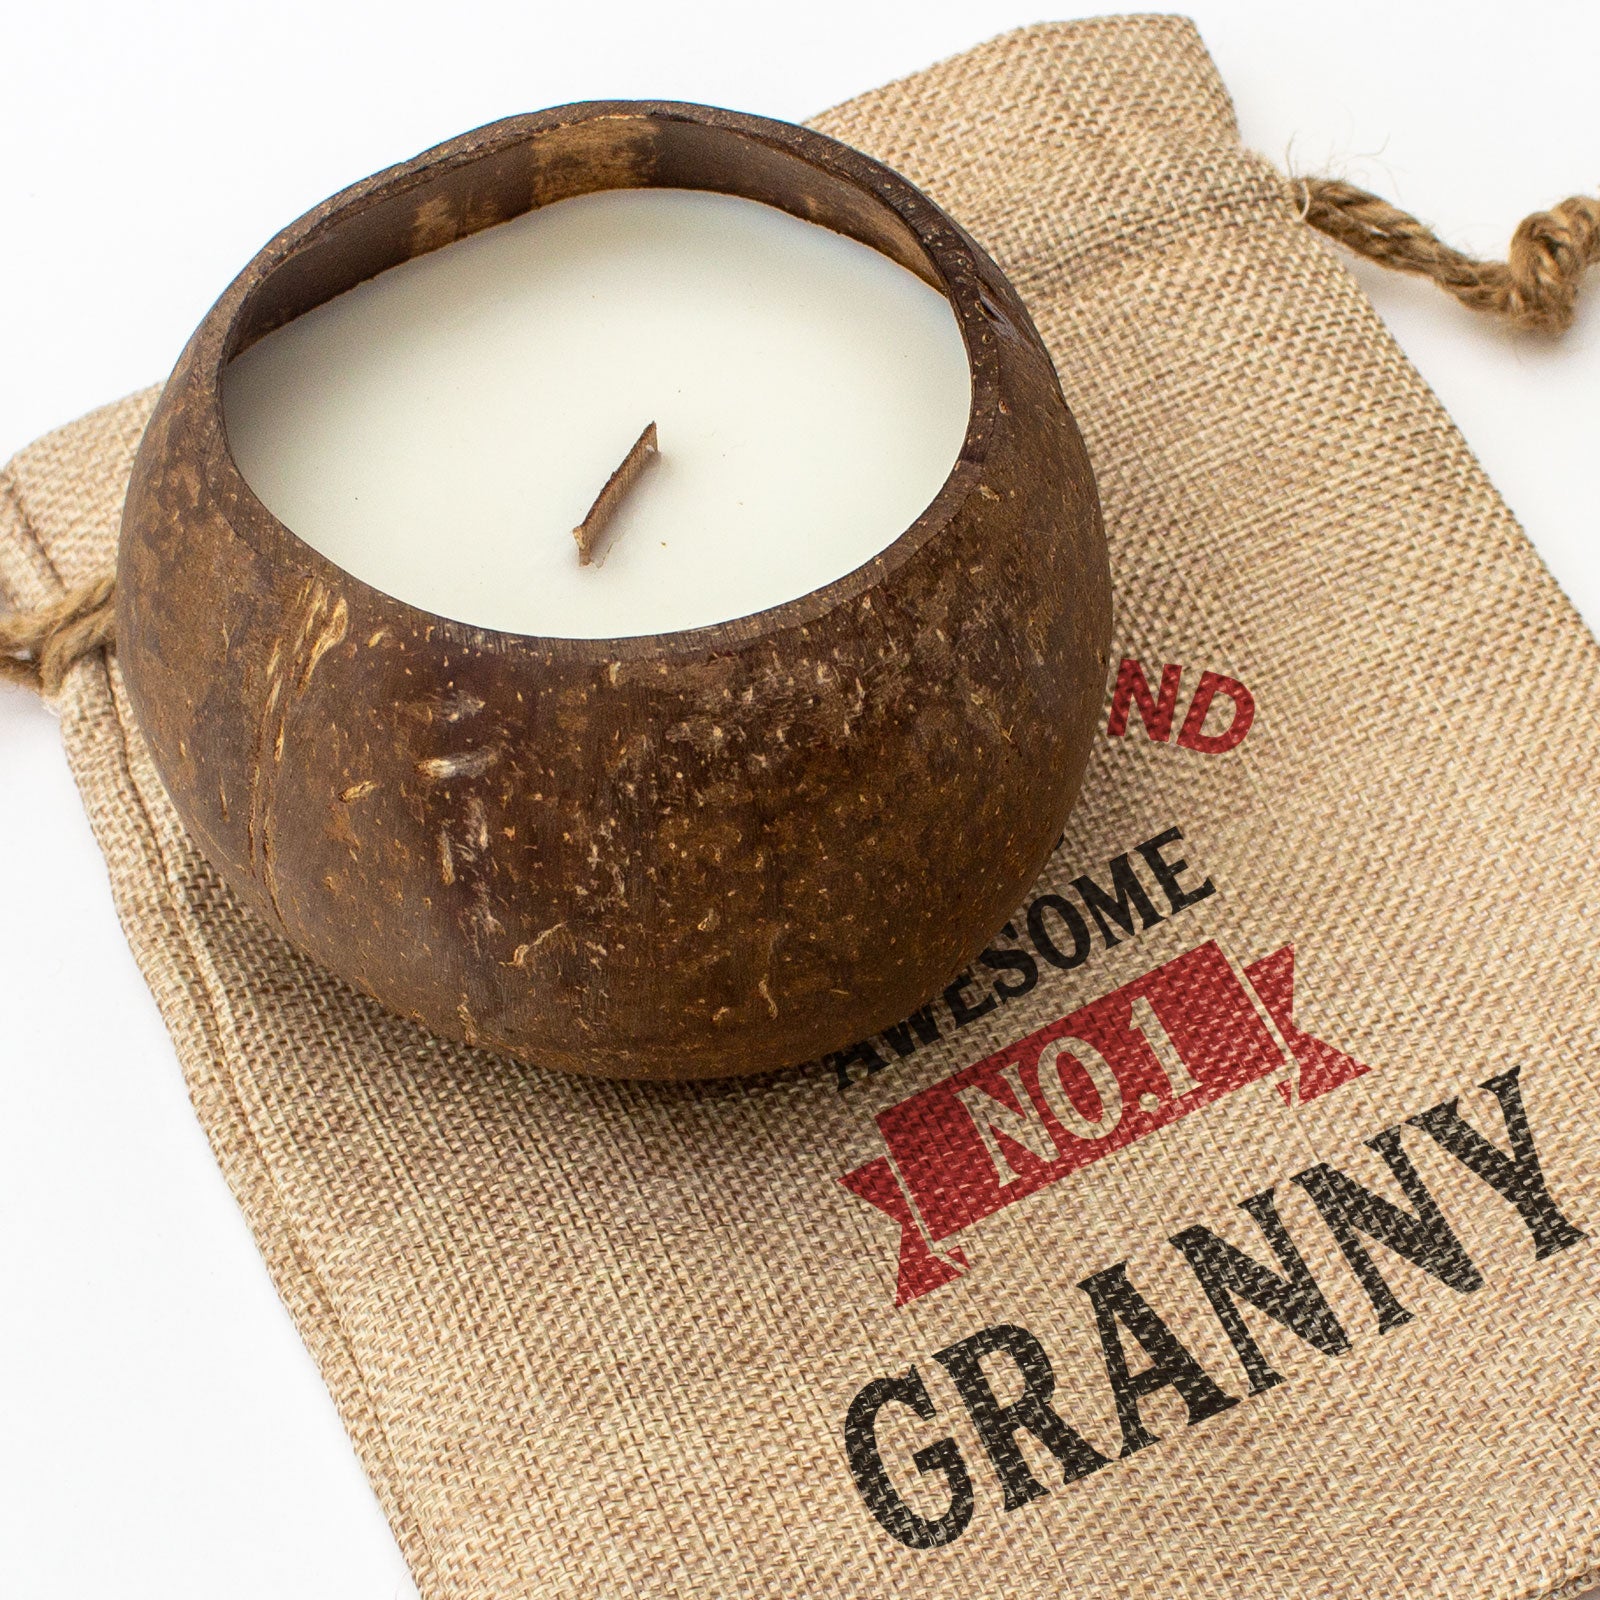 No.1 GRANNY - Toasted Coconut Bowl Candle – Soy Wax - Gift Present